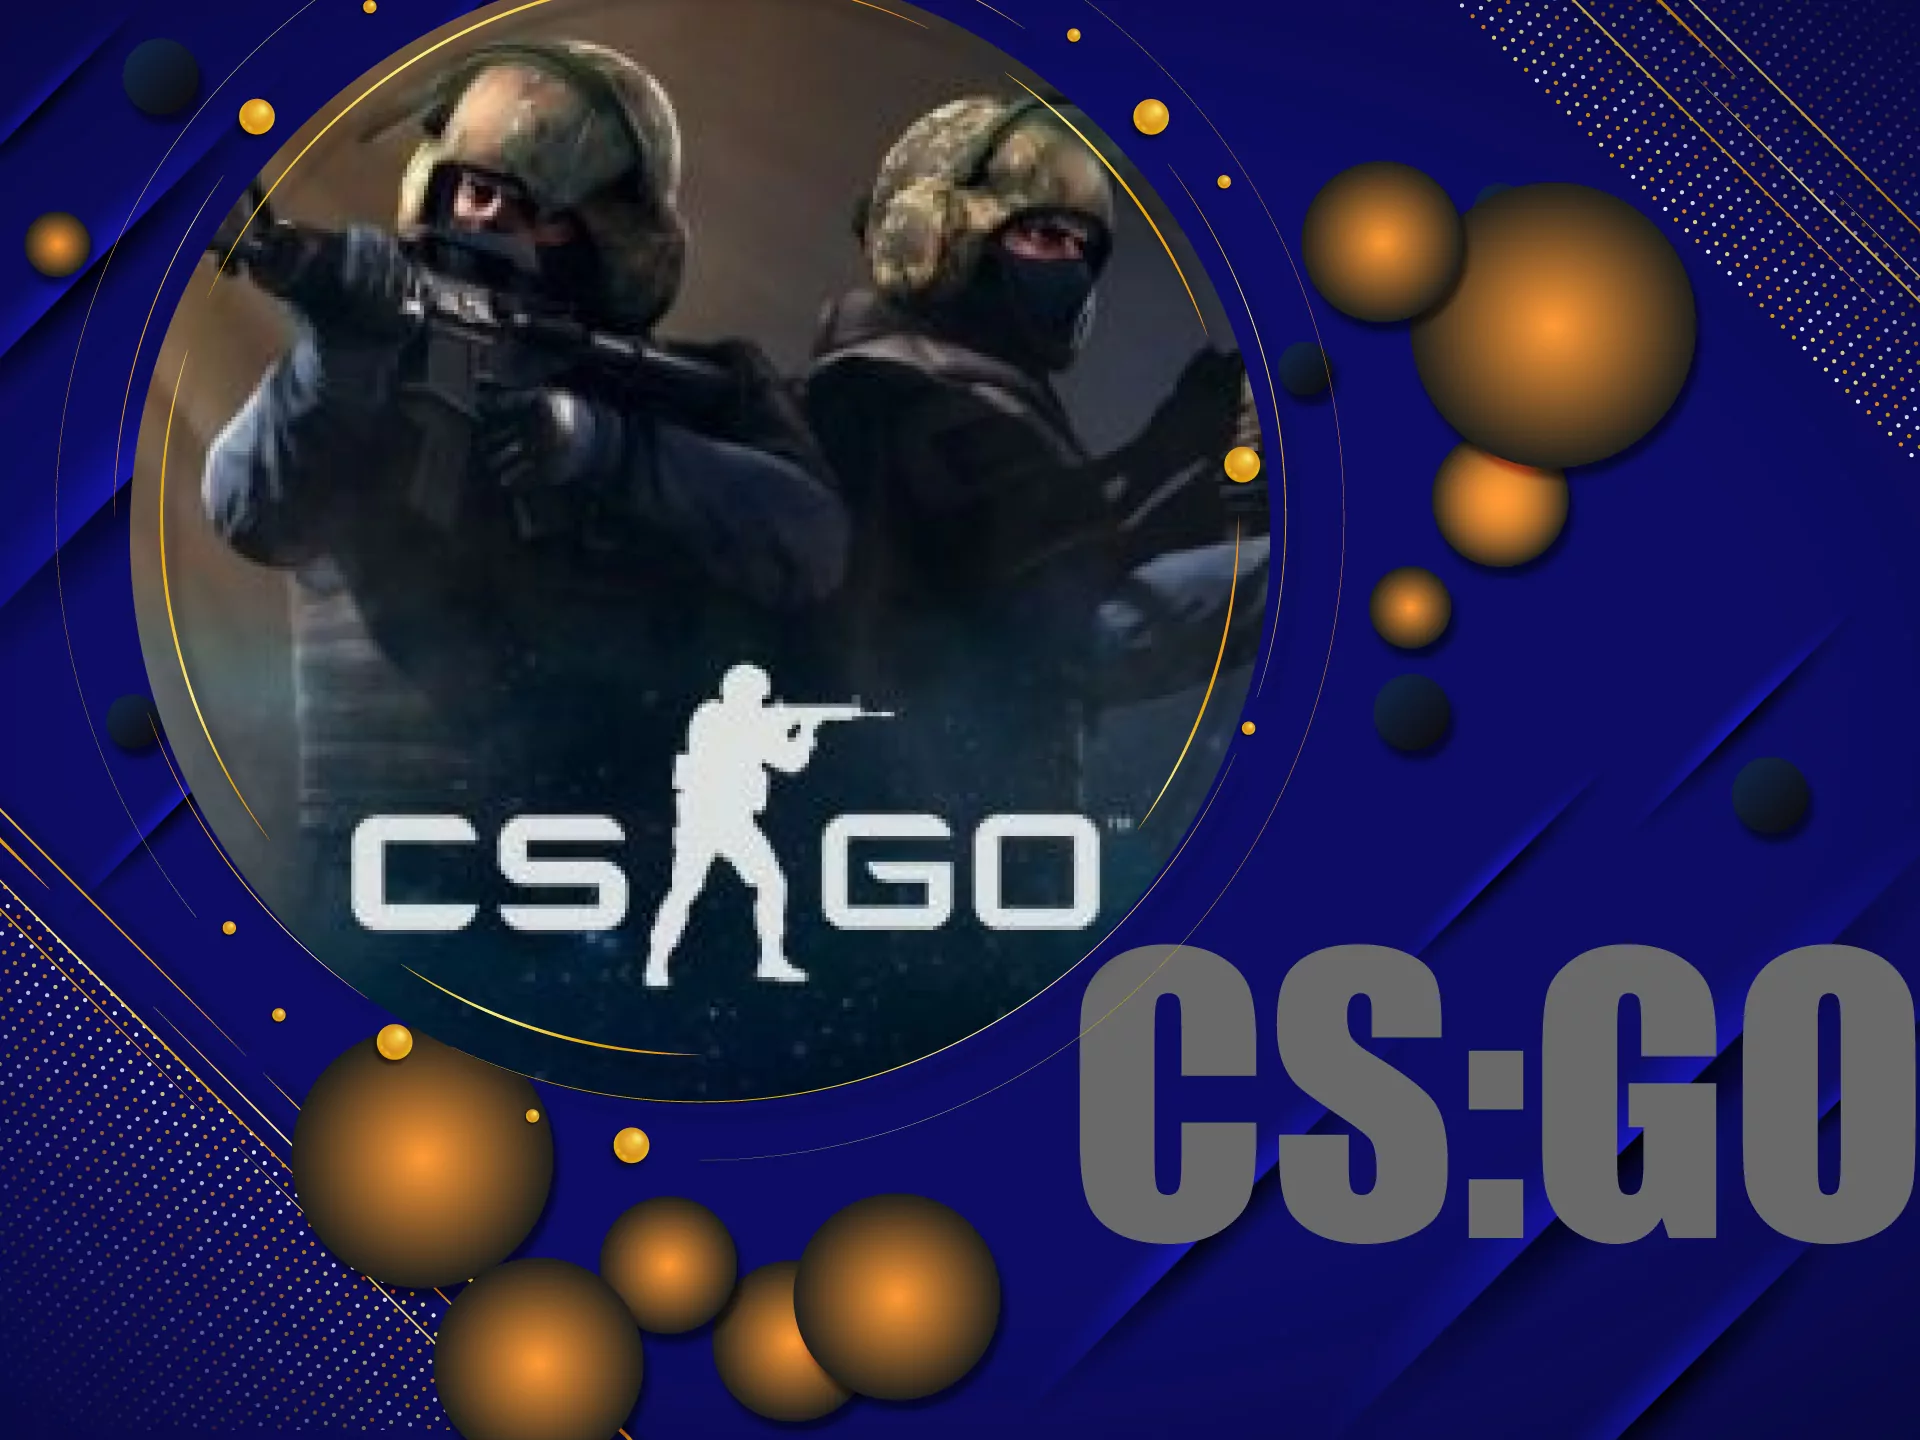 Bet on the CS:GO matches and win money from cybersports in the ICCWIN app.